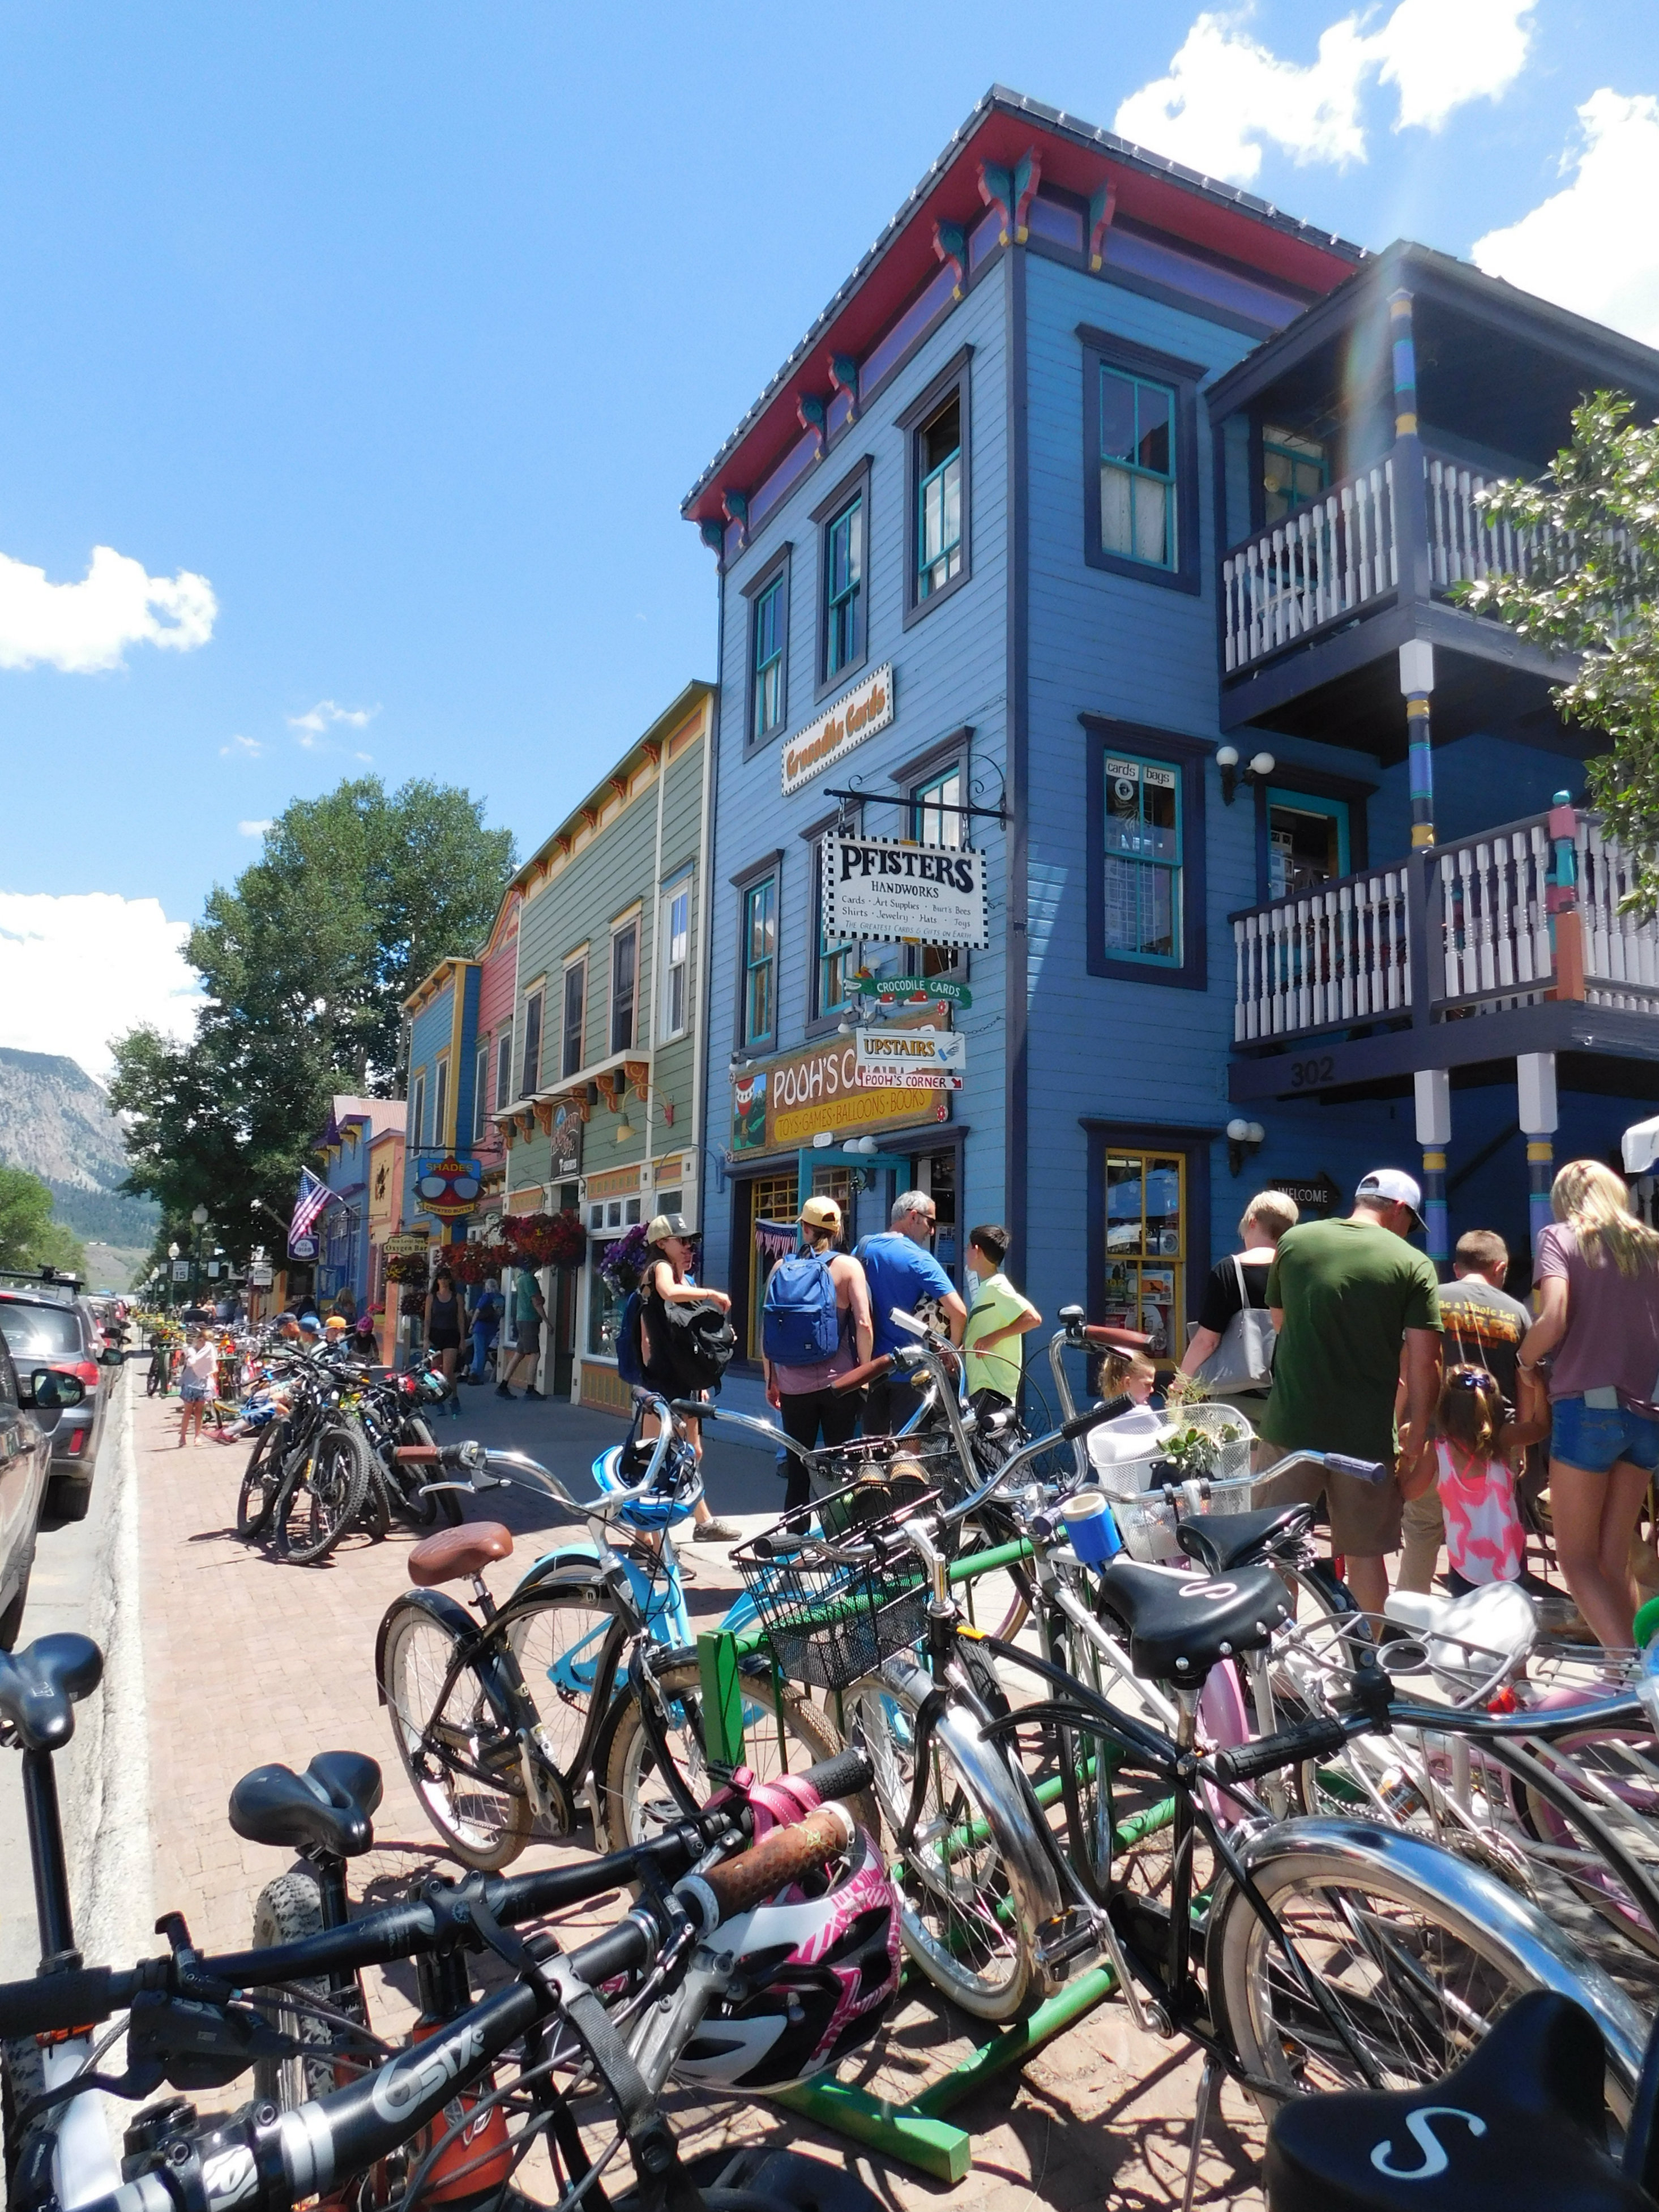 Downtown Crested Butte in Colorado